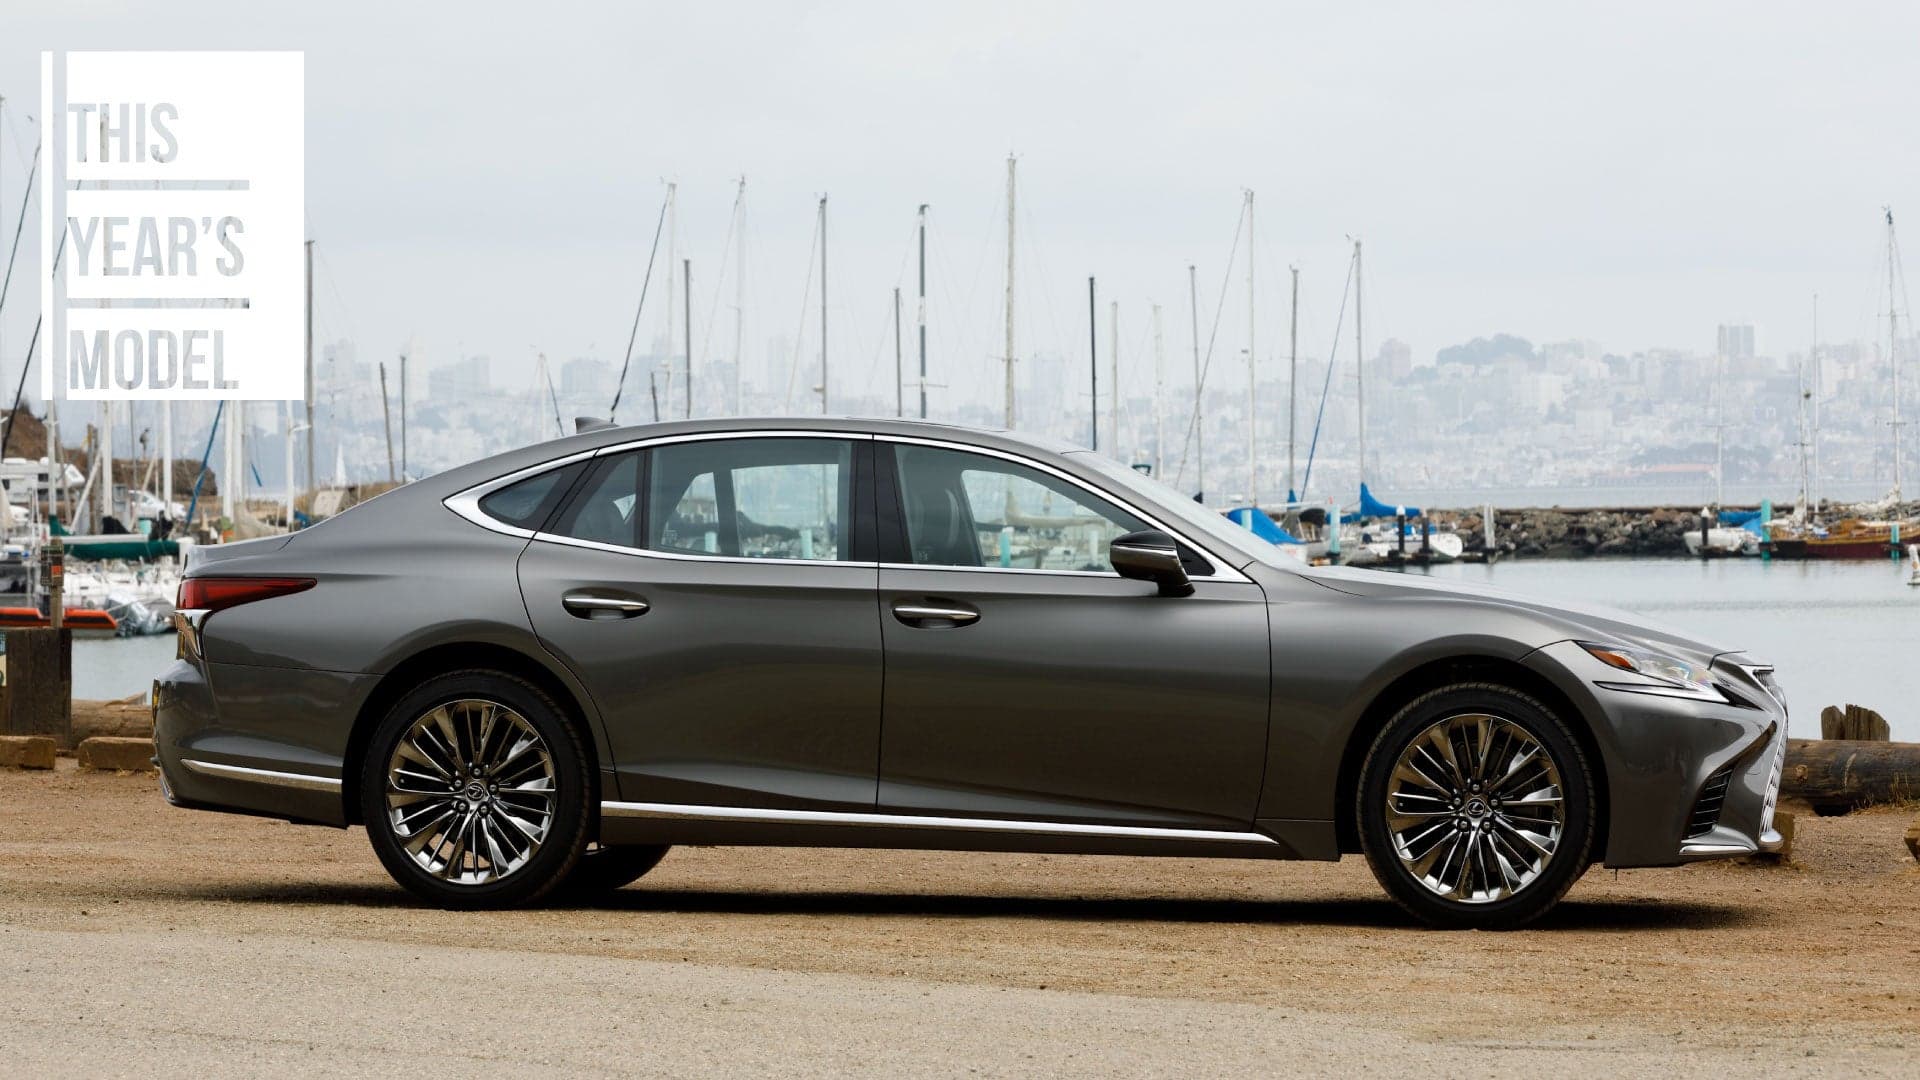 2018 Lexus LS 500h Review: A Flagship Sedan Rises from the Grave, But the Hybrid Just Won’t Die